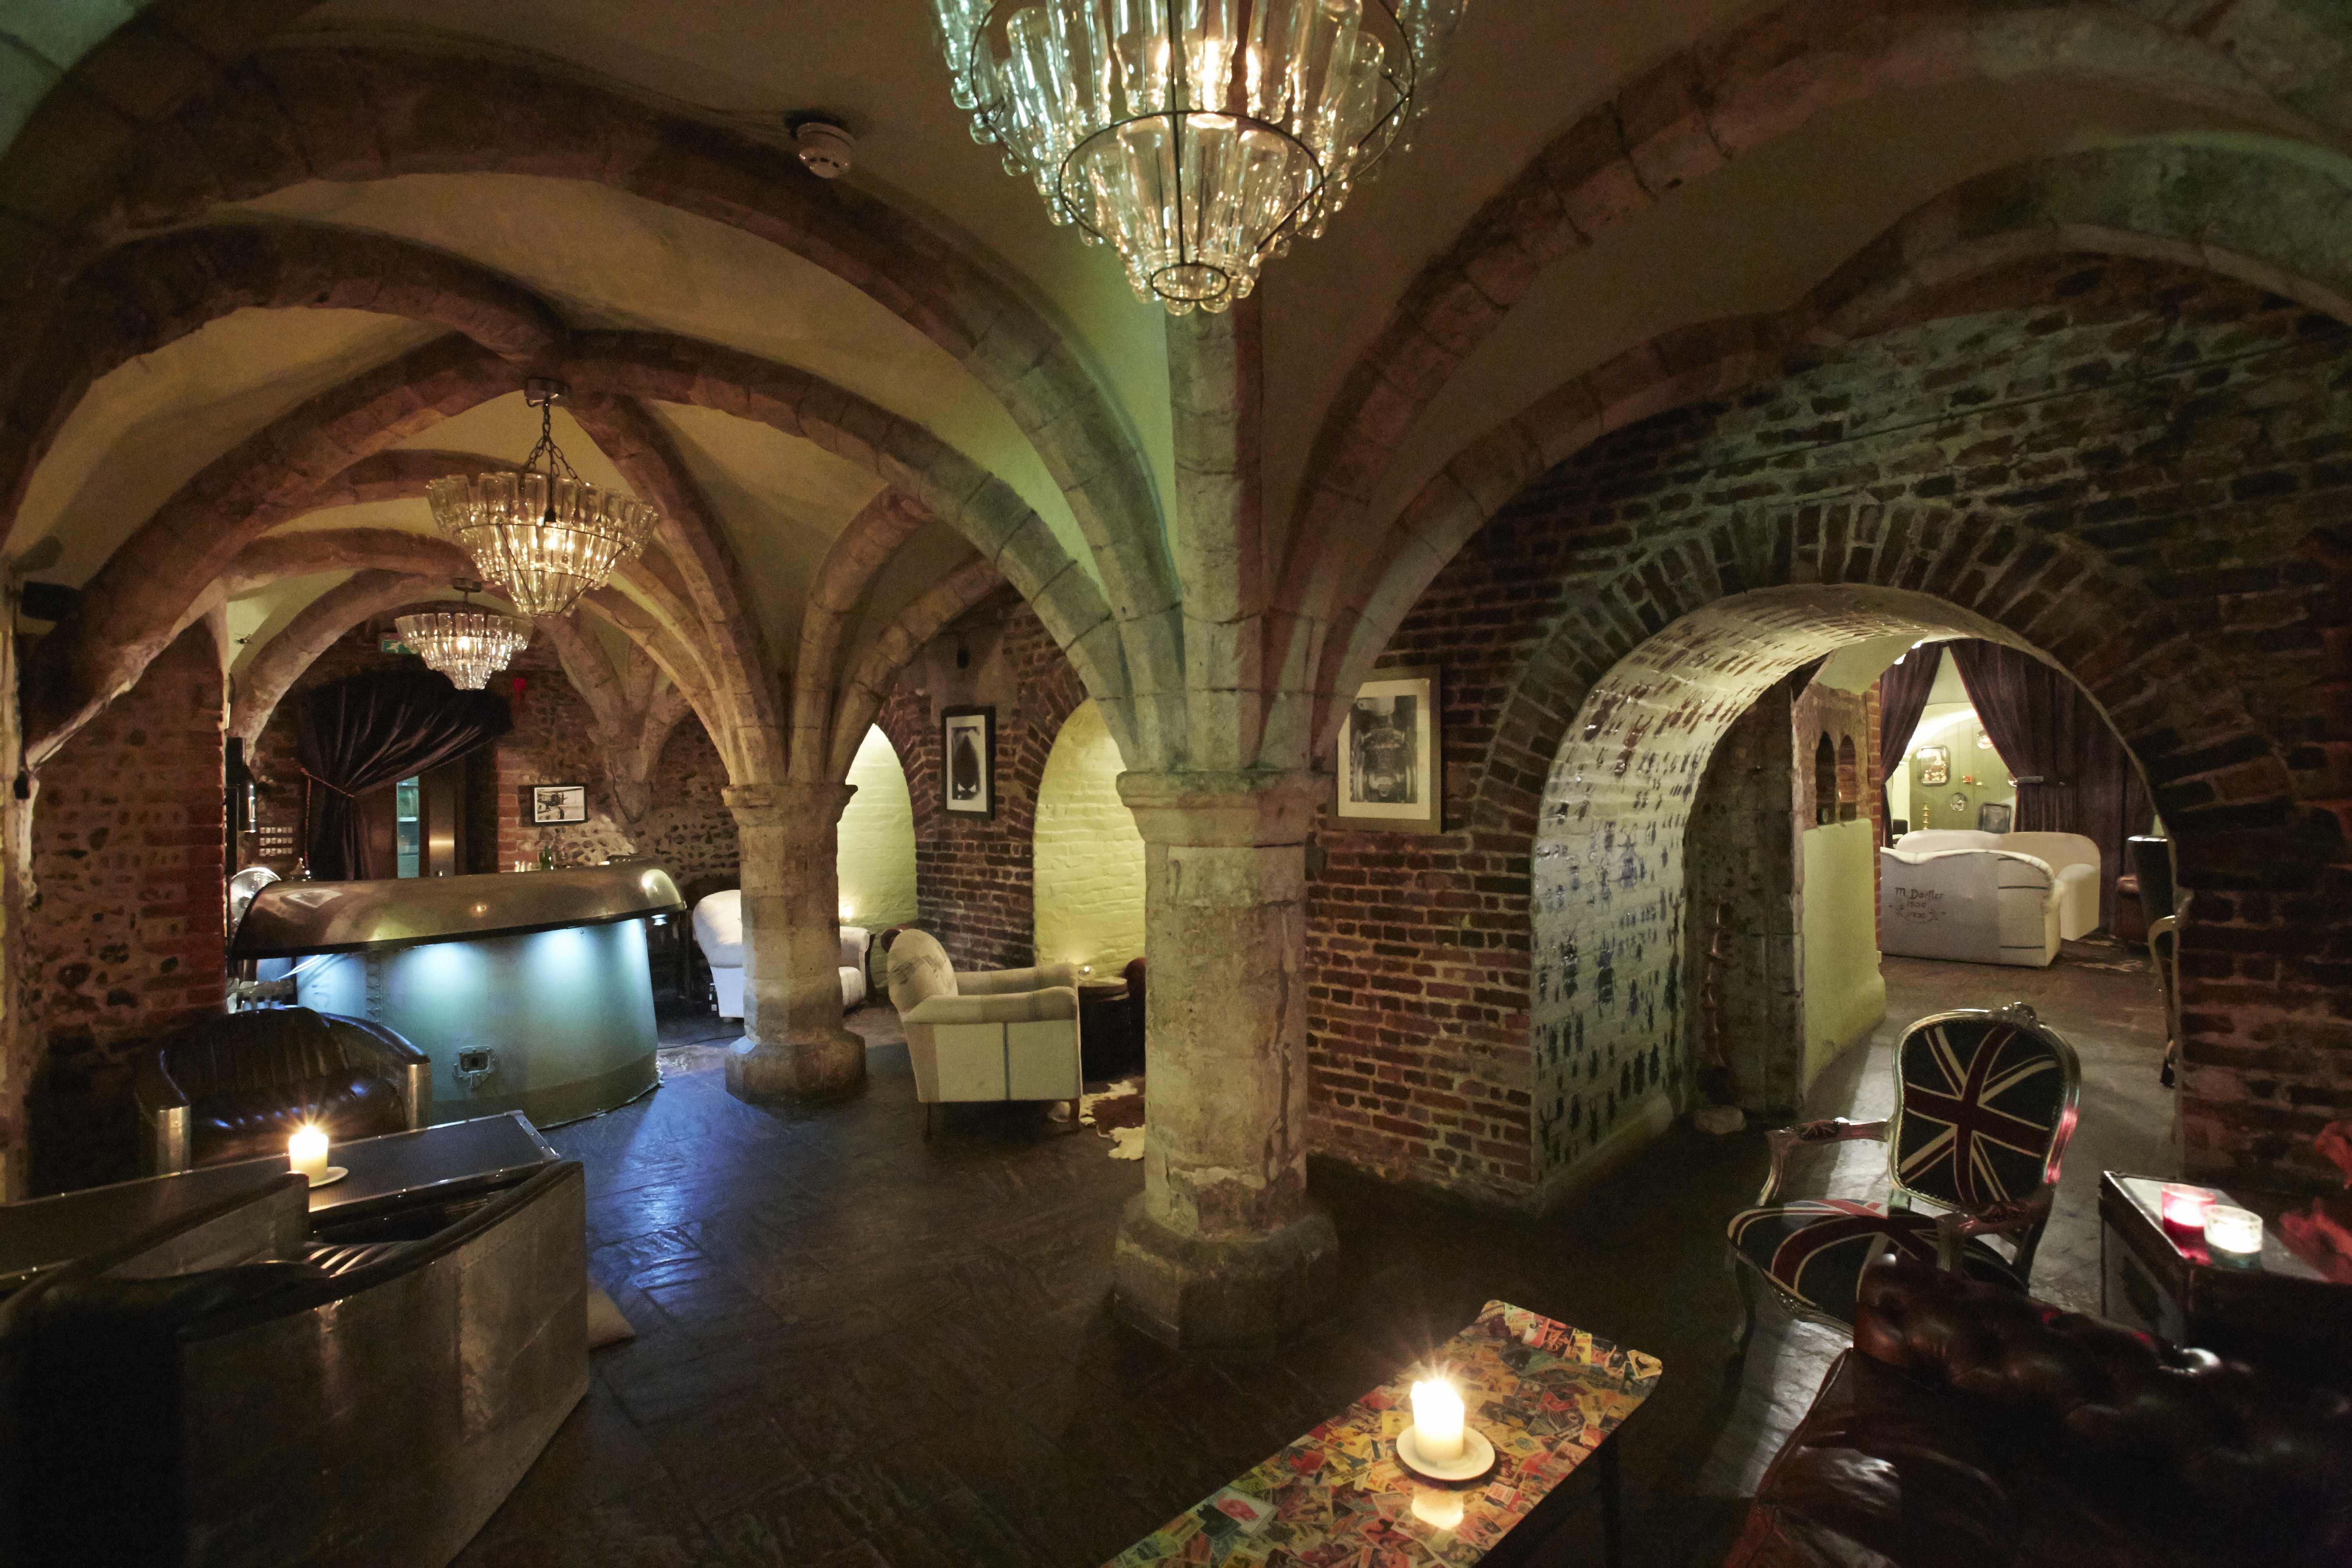 The quirky underground bar at The Angel hotel in Bury St Edmunds